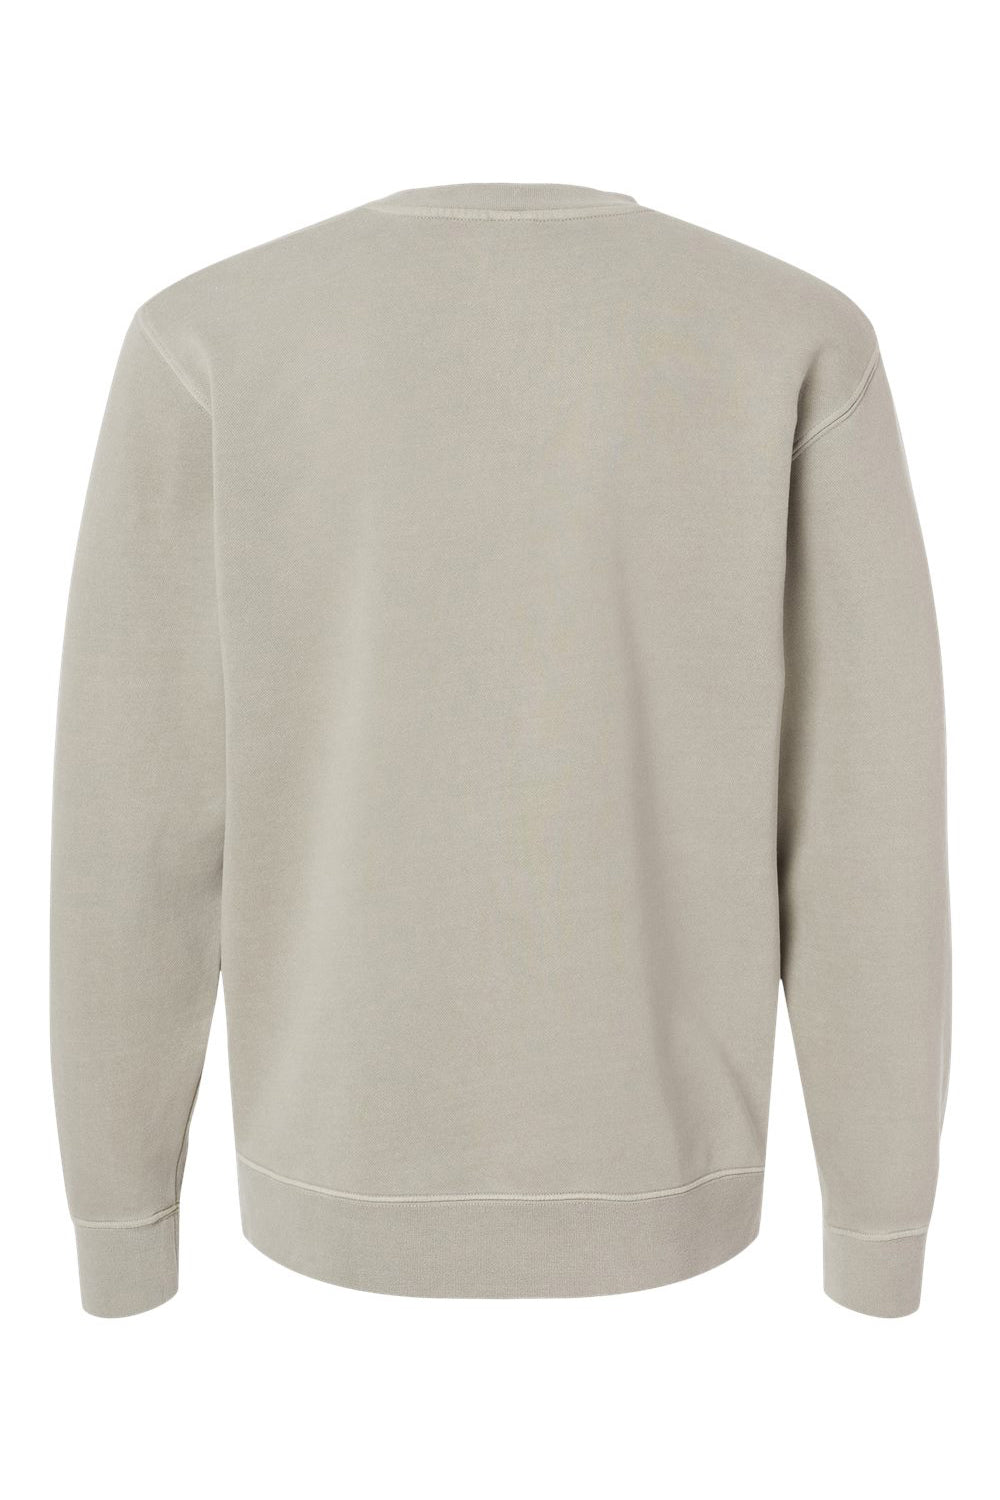 Independent Trading Co. PRM3500 Mens Pigment Dyed Crewneck Sweatshirt Cement Grey Flat Back